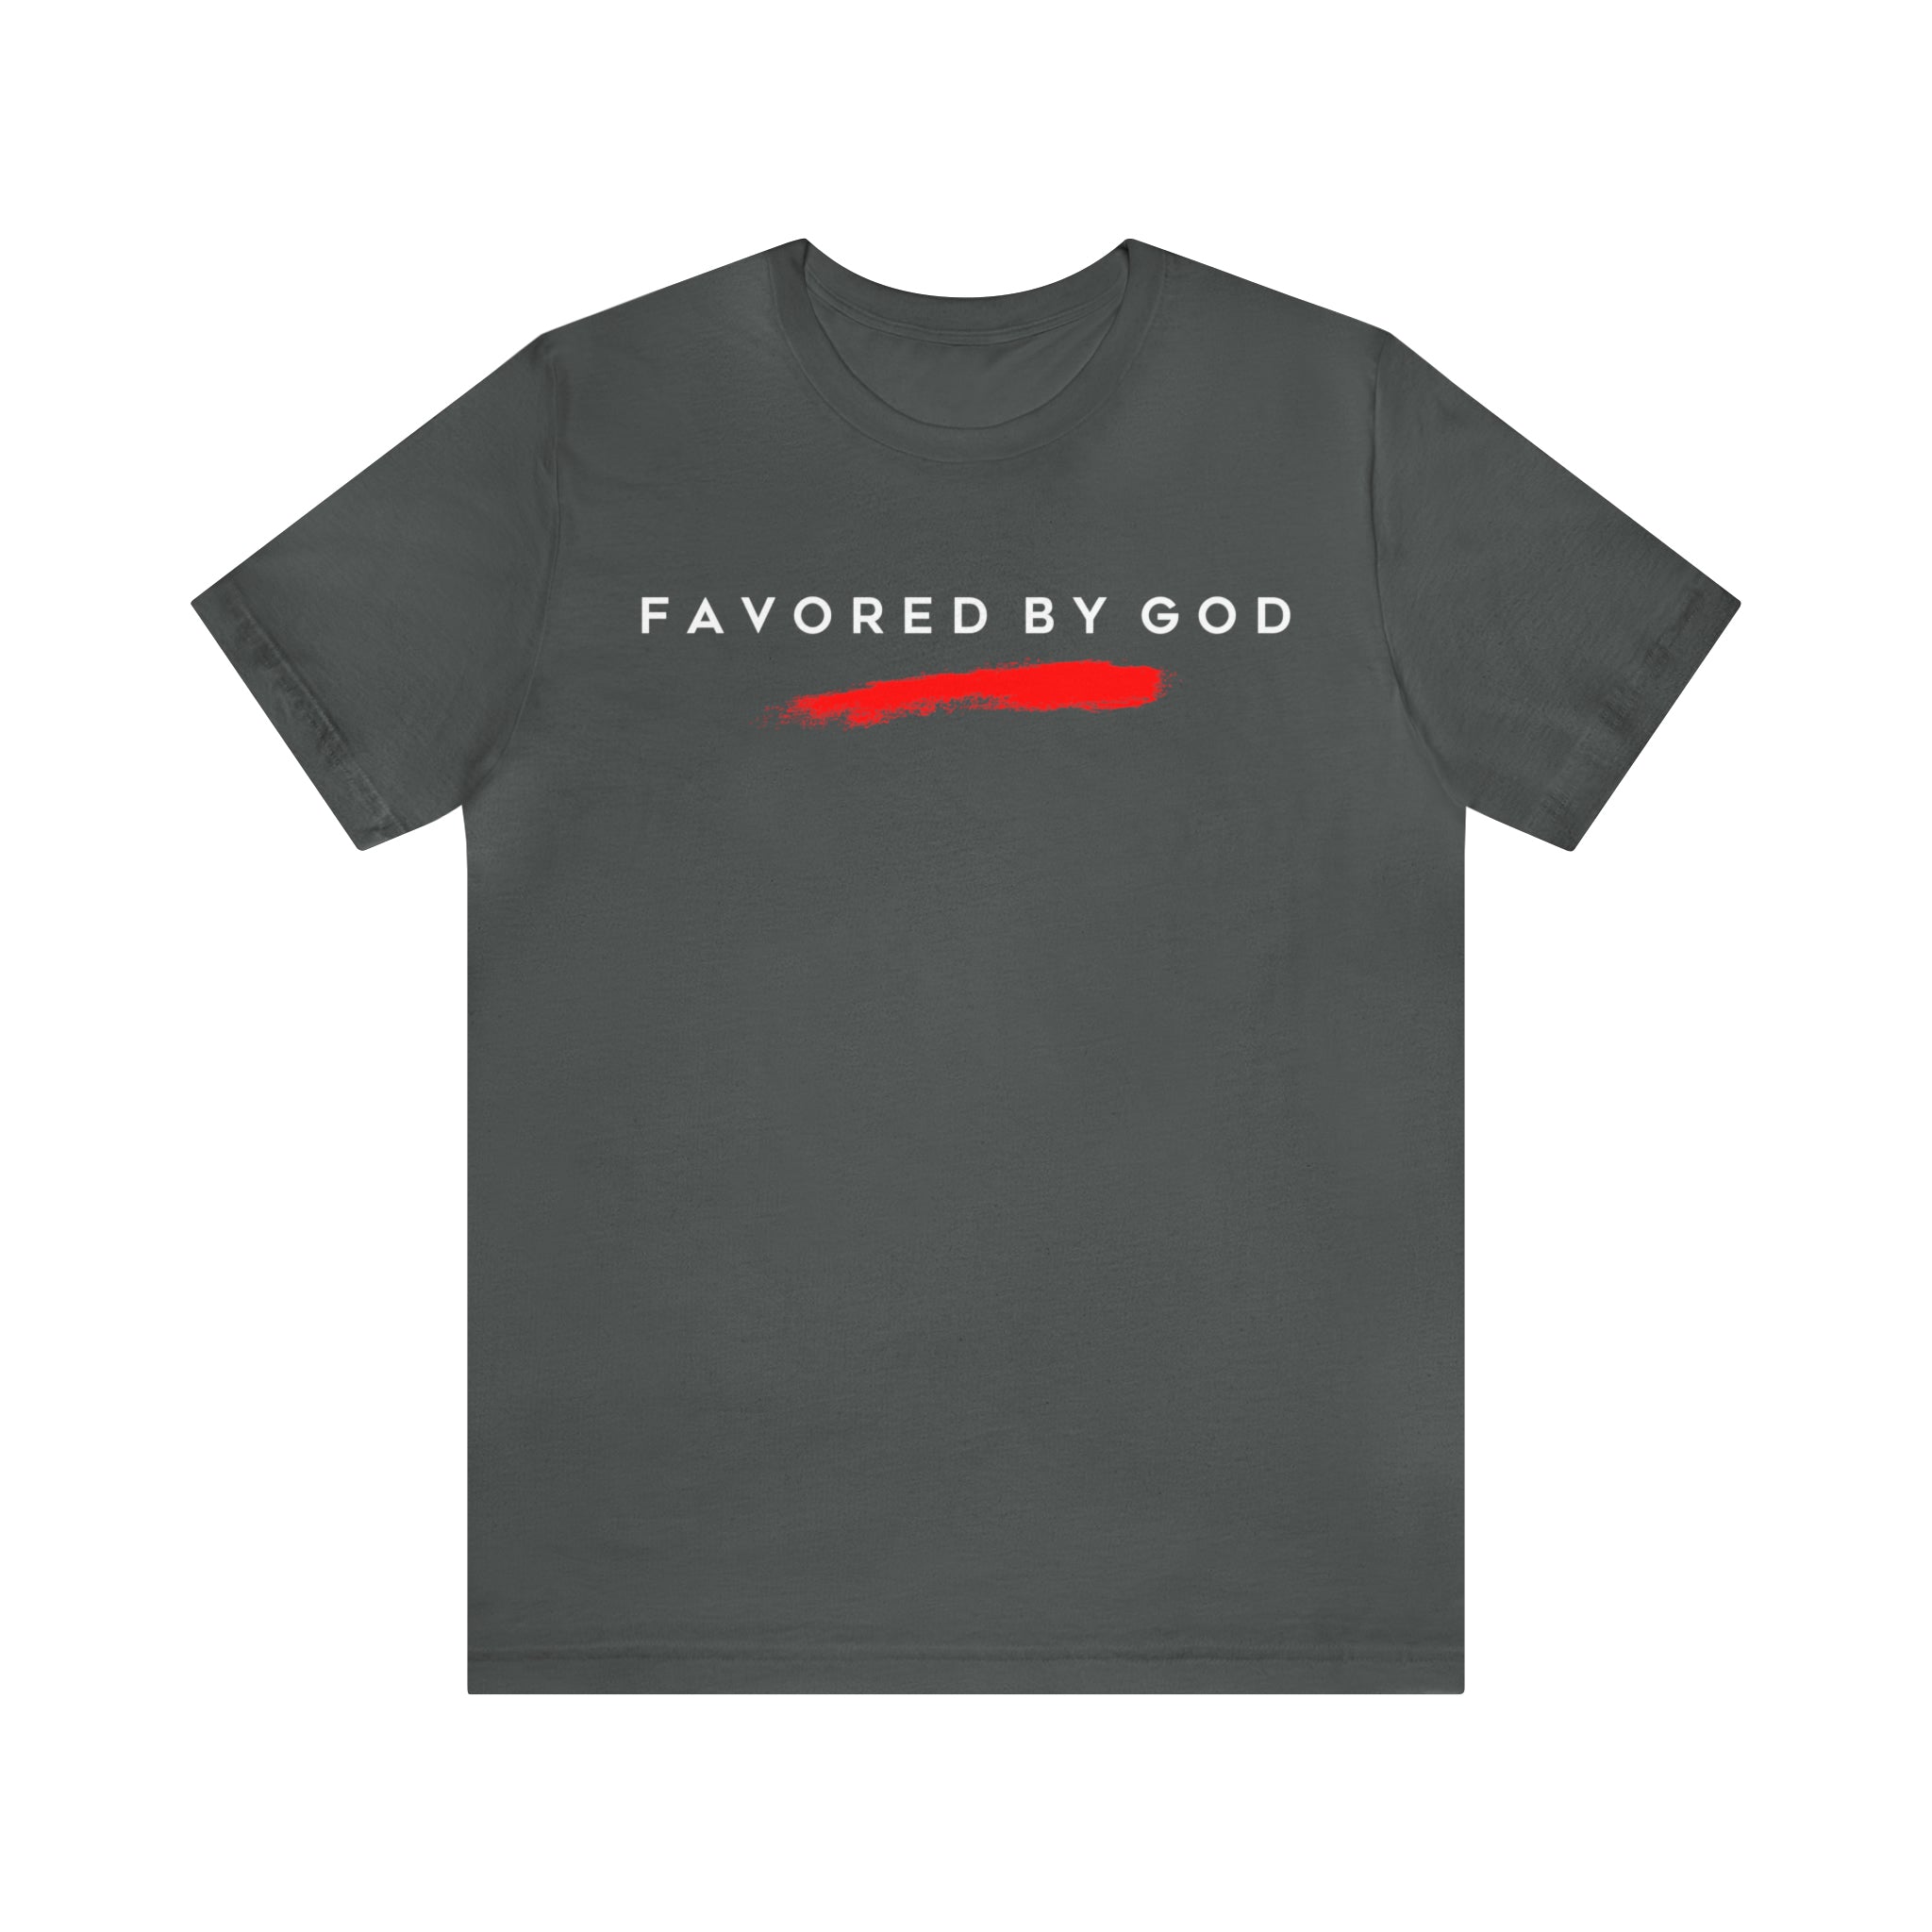 By His Stripes Favored Tee